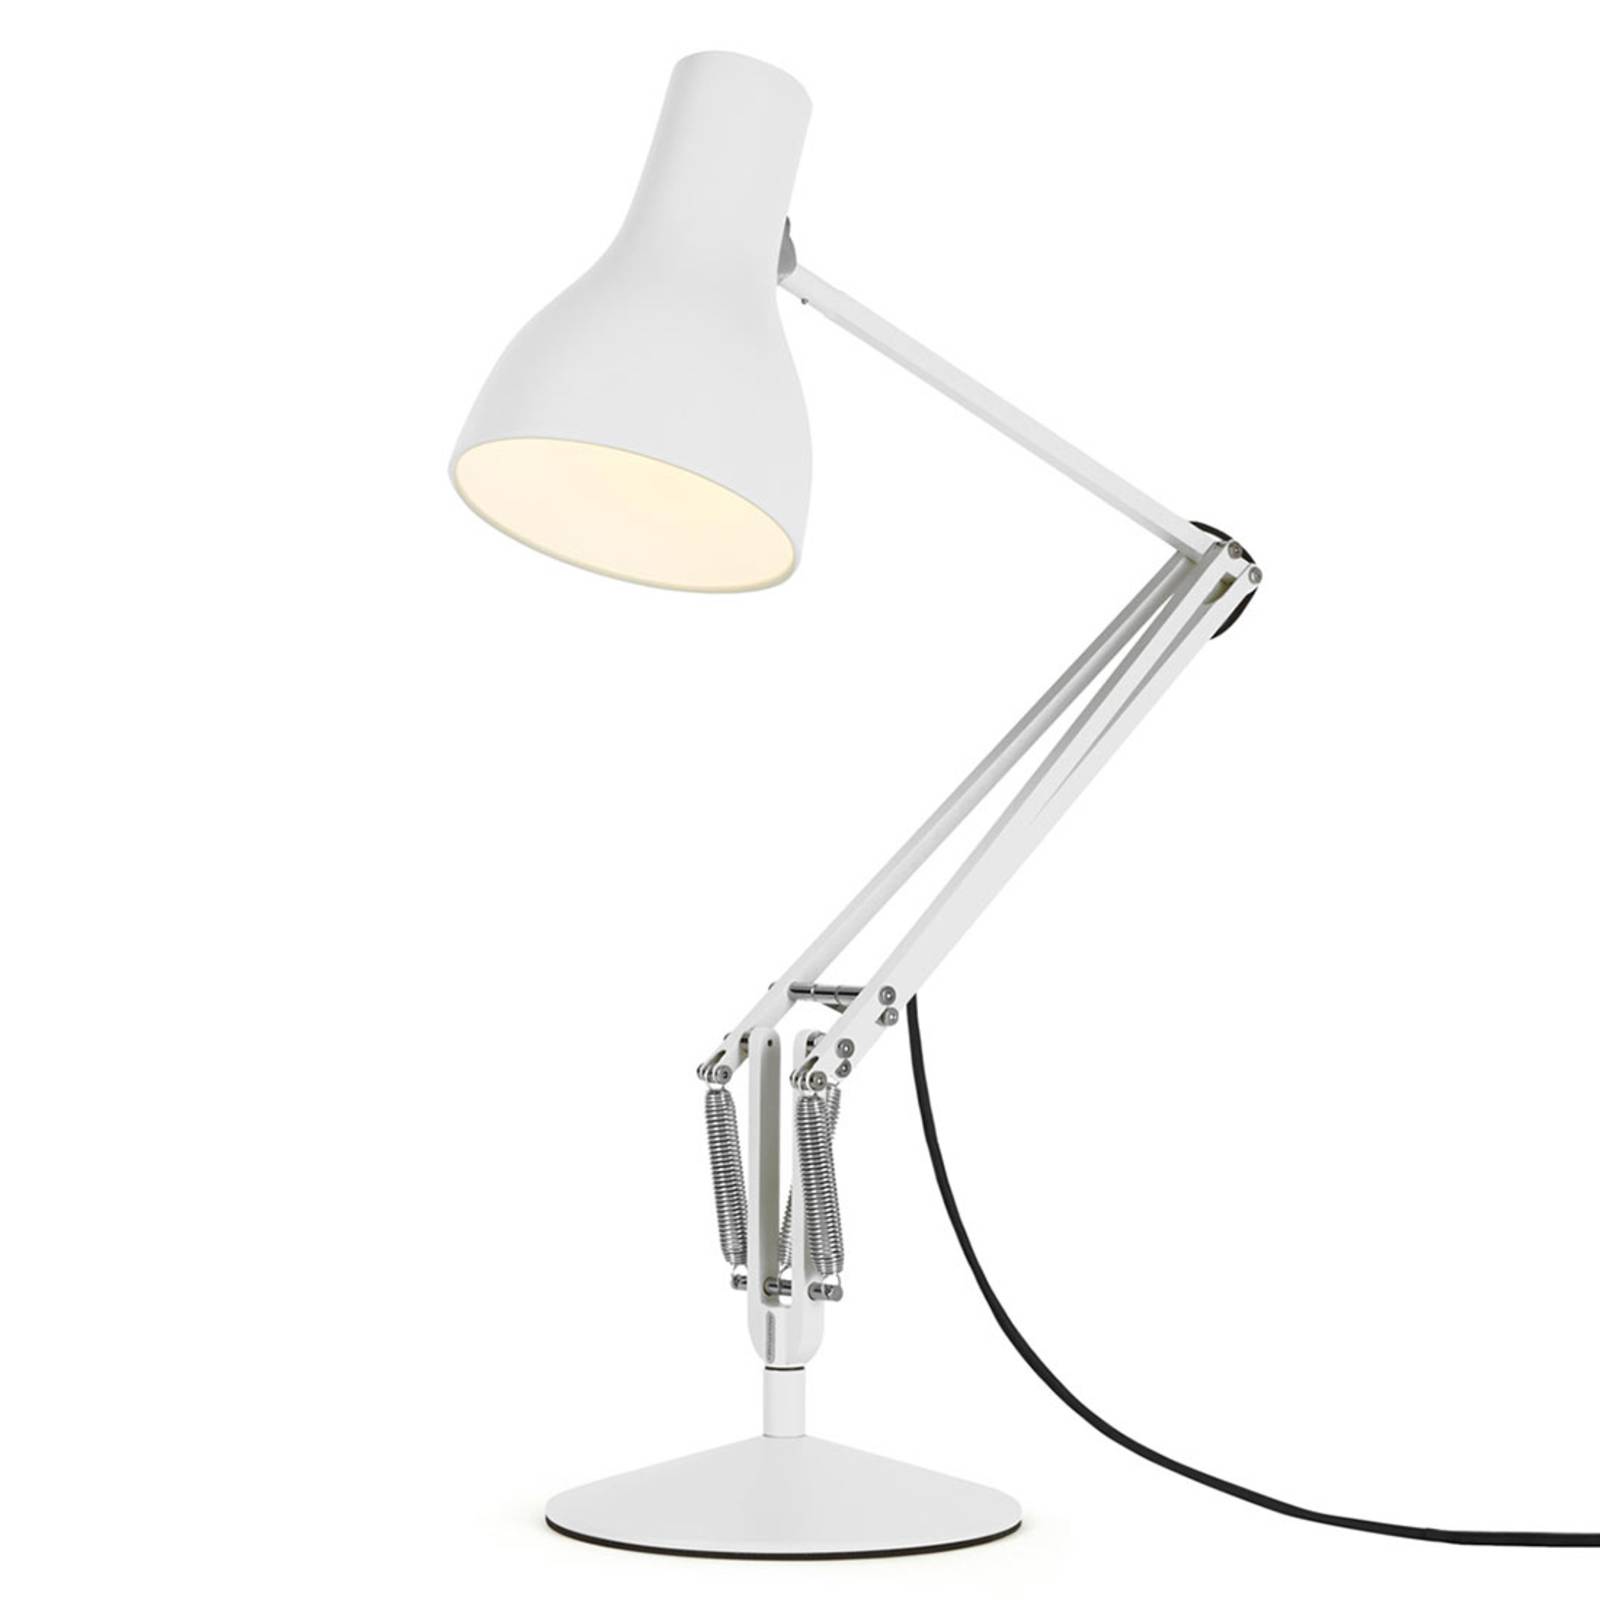 Anglepoise Type 75 table lamp alpine white